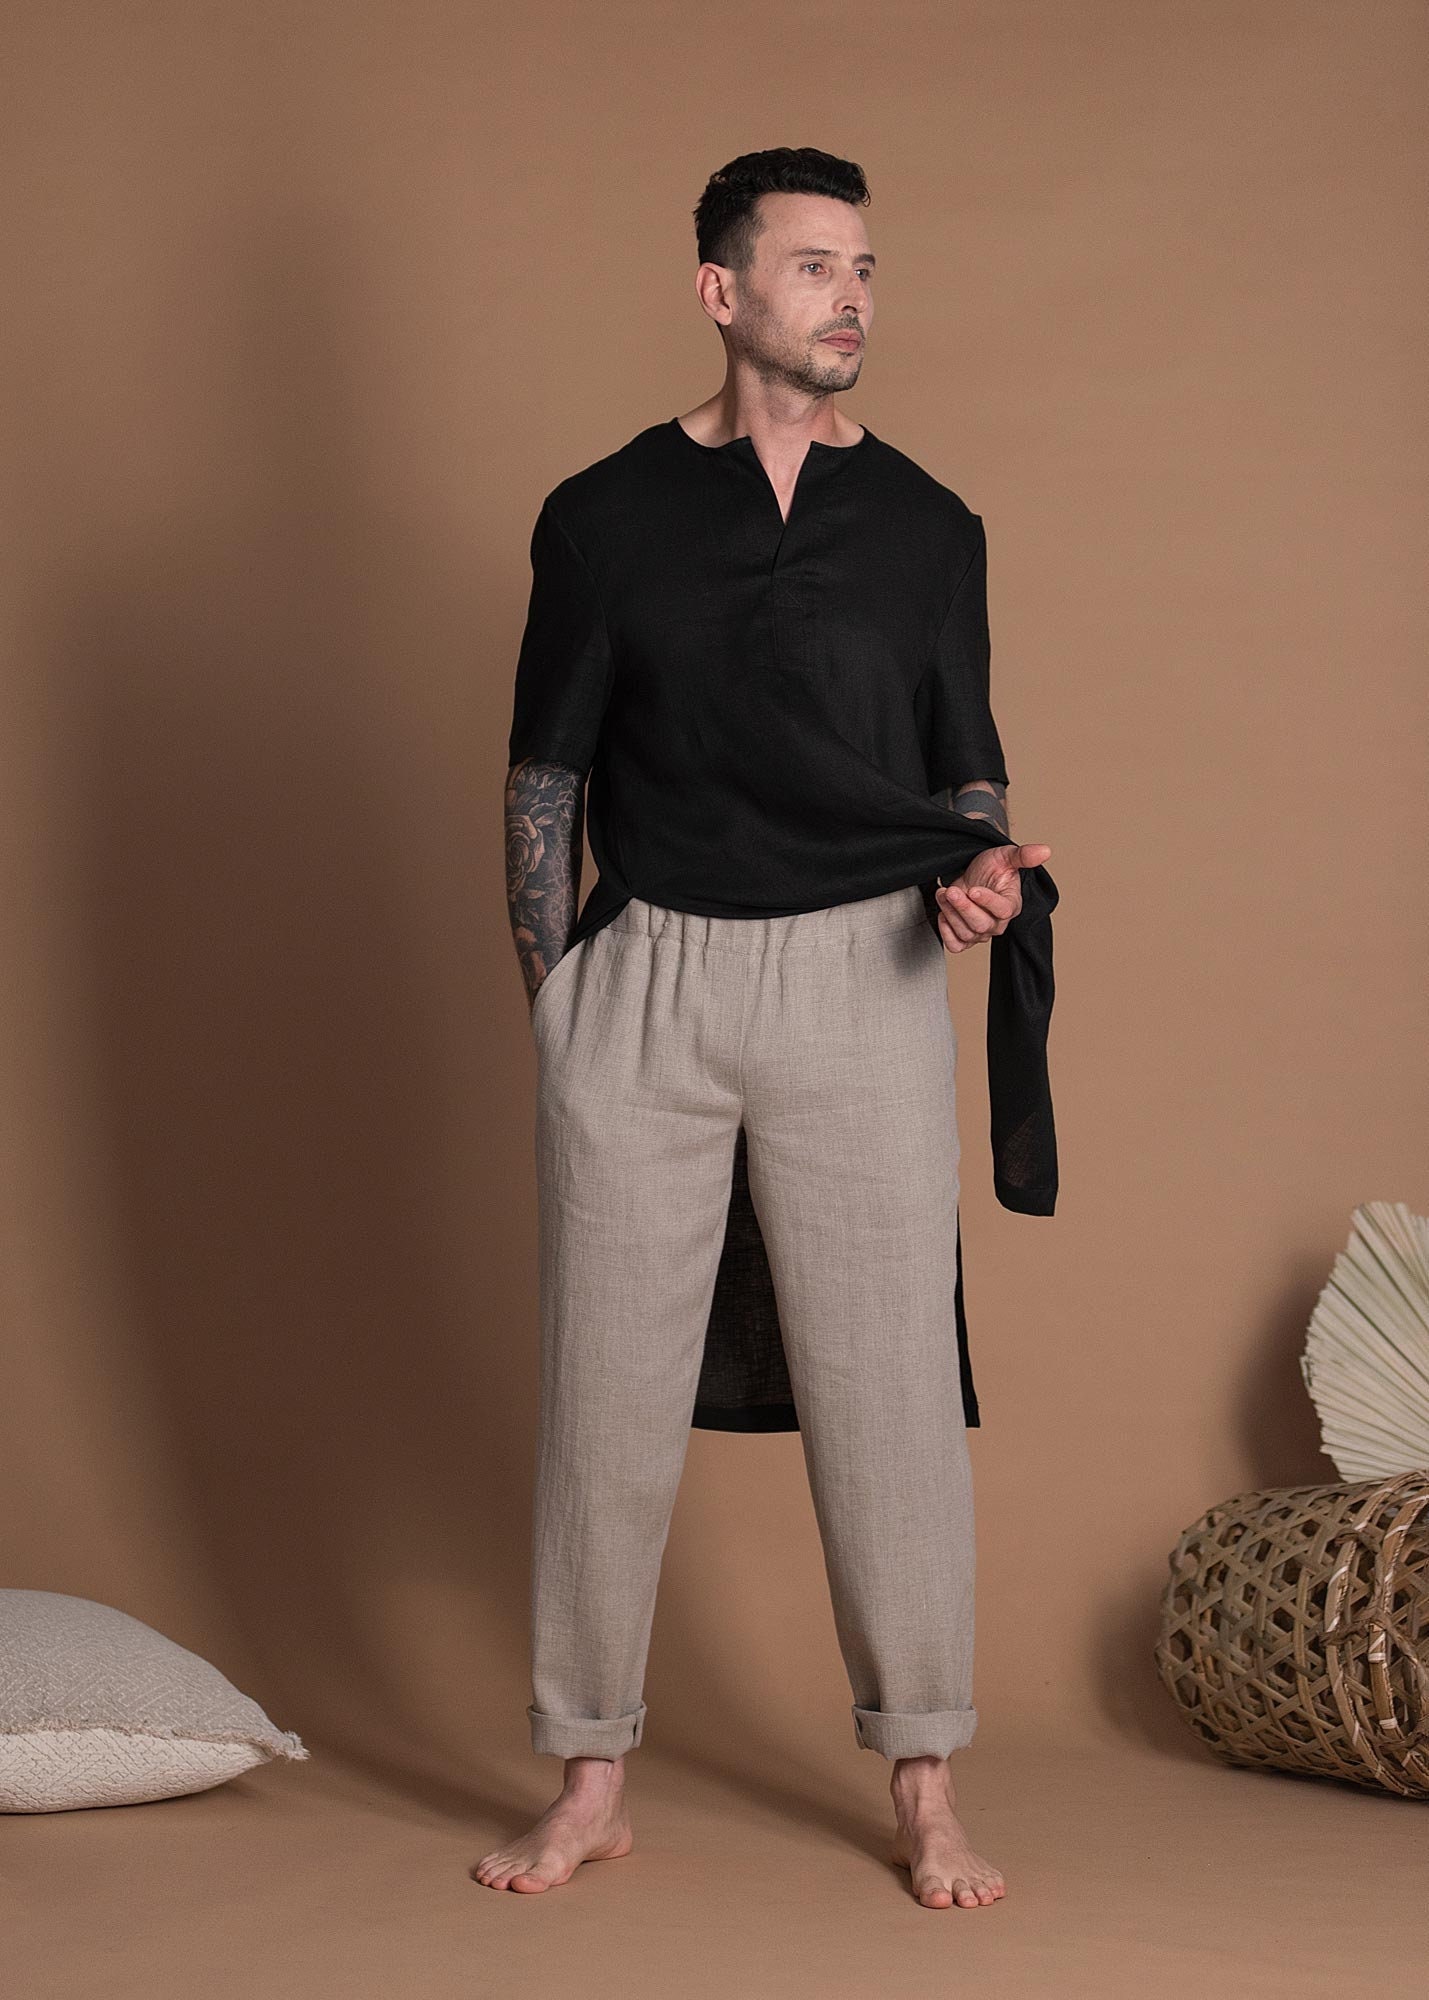 Loose Pleated Pants - Black Ficus Linen Clothing